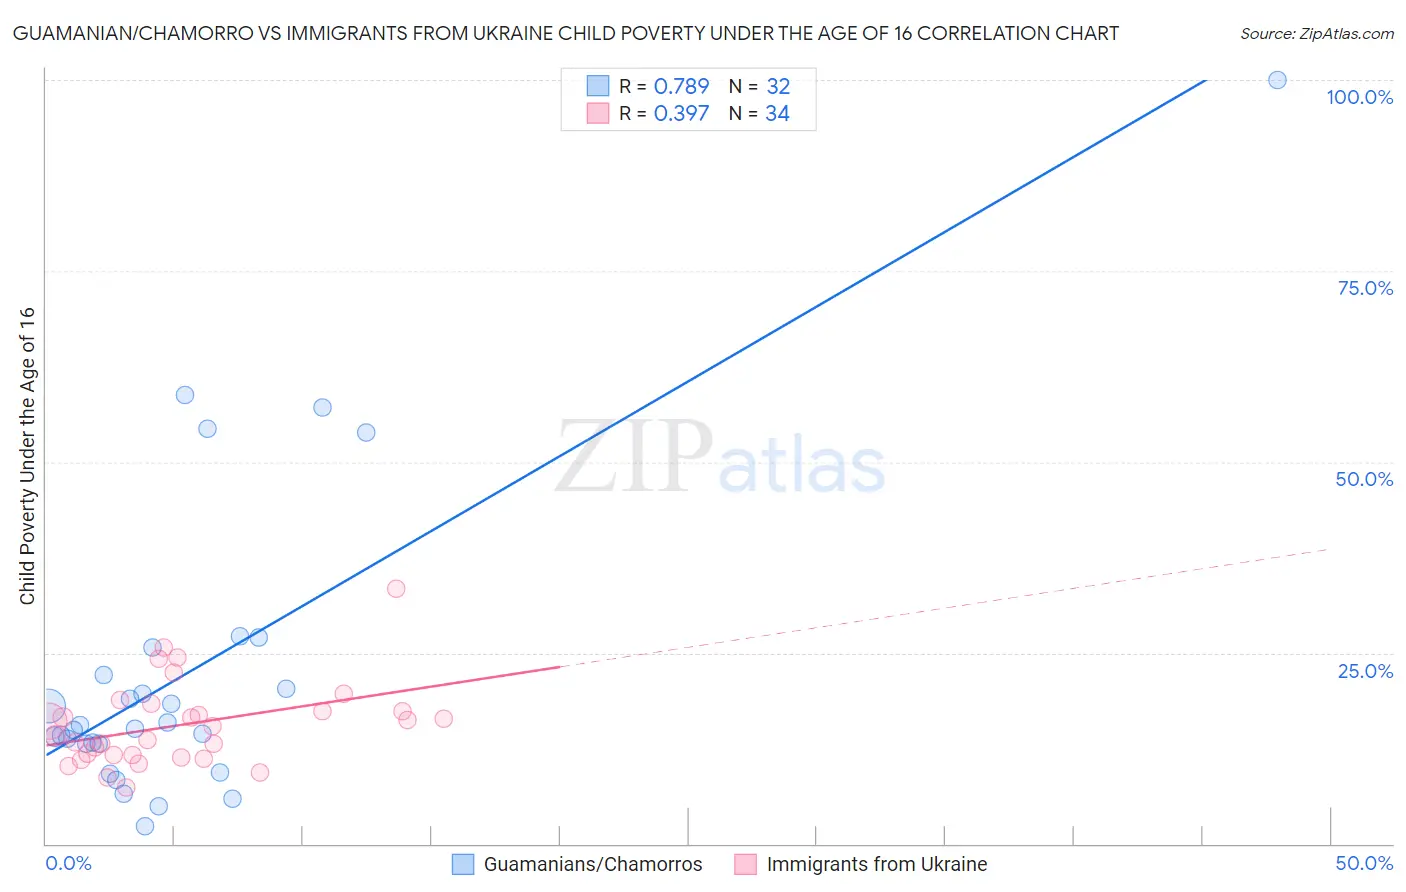 Guamanian/Chamorro vs Immigrants from Ukraine Child Poverty Under the Age of 16